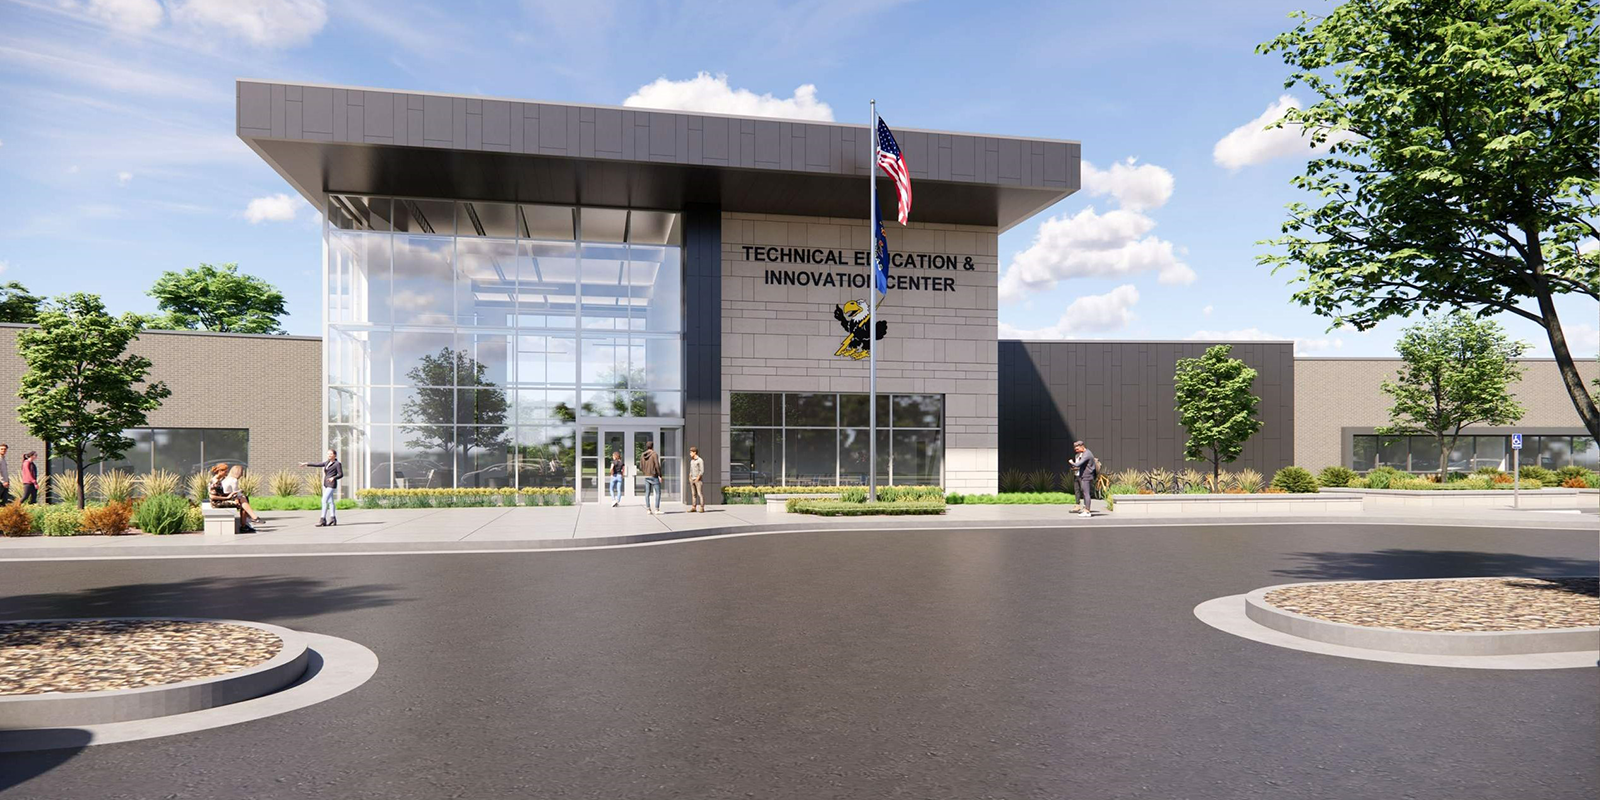 A rendering of the Technical Education & Innovation Center.